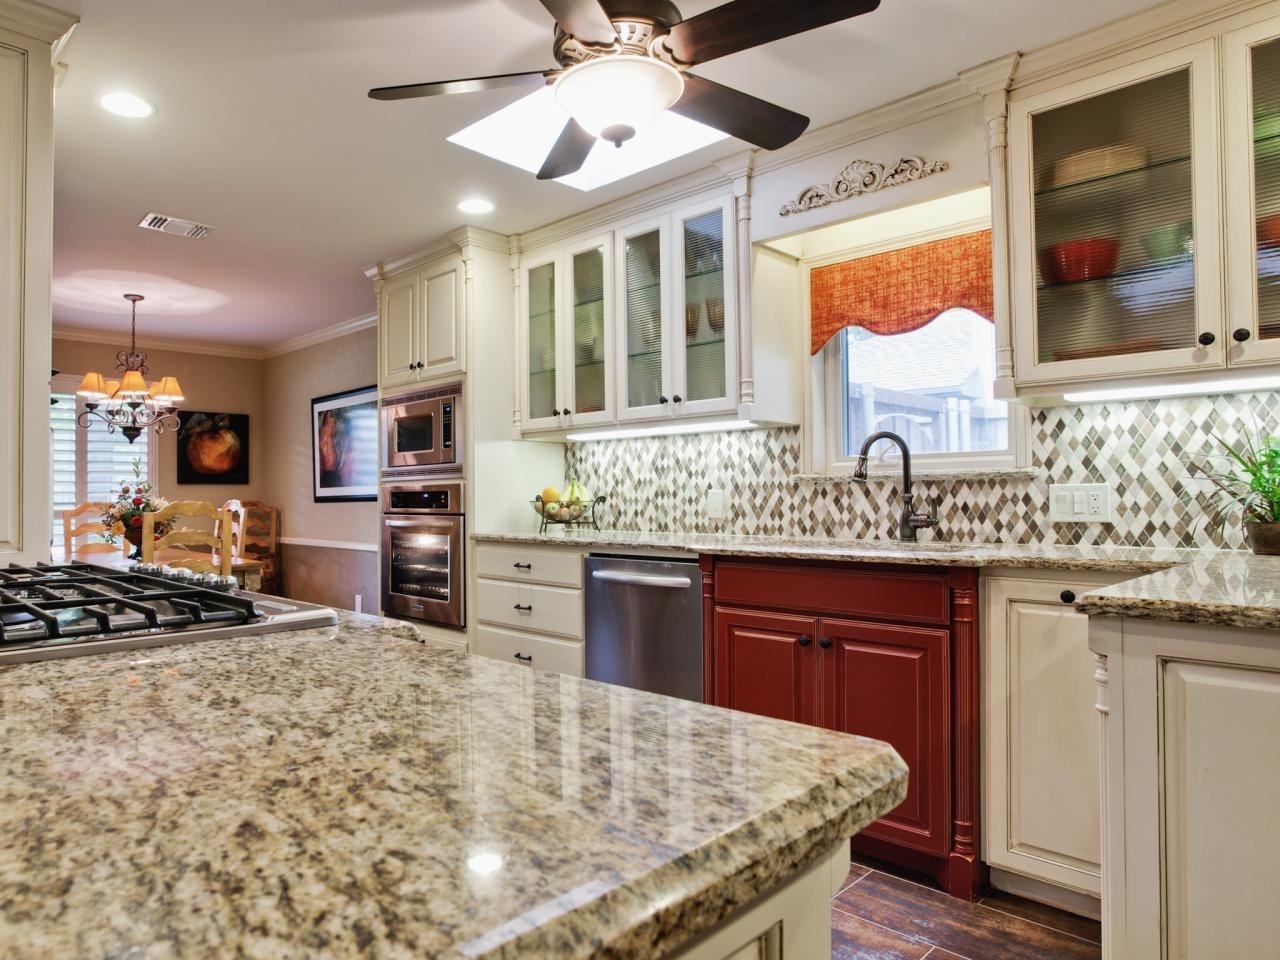 10 Great Backsplash Ideas For Kitchens With Granite Countertops 2023